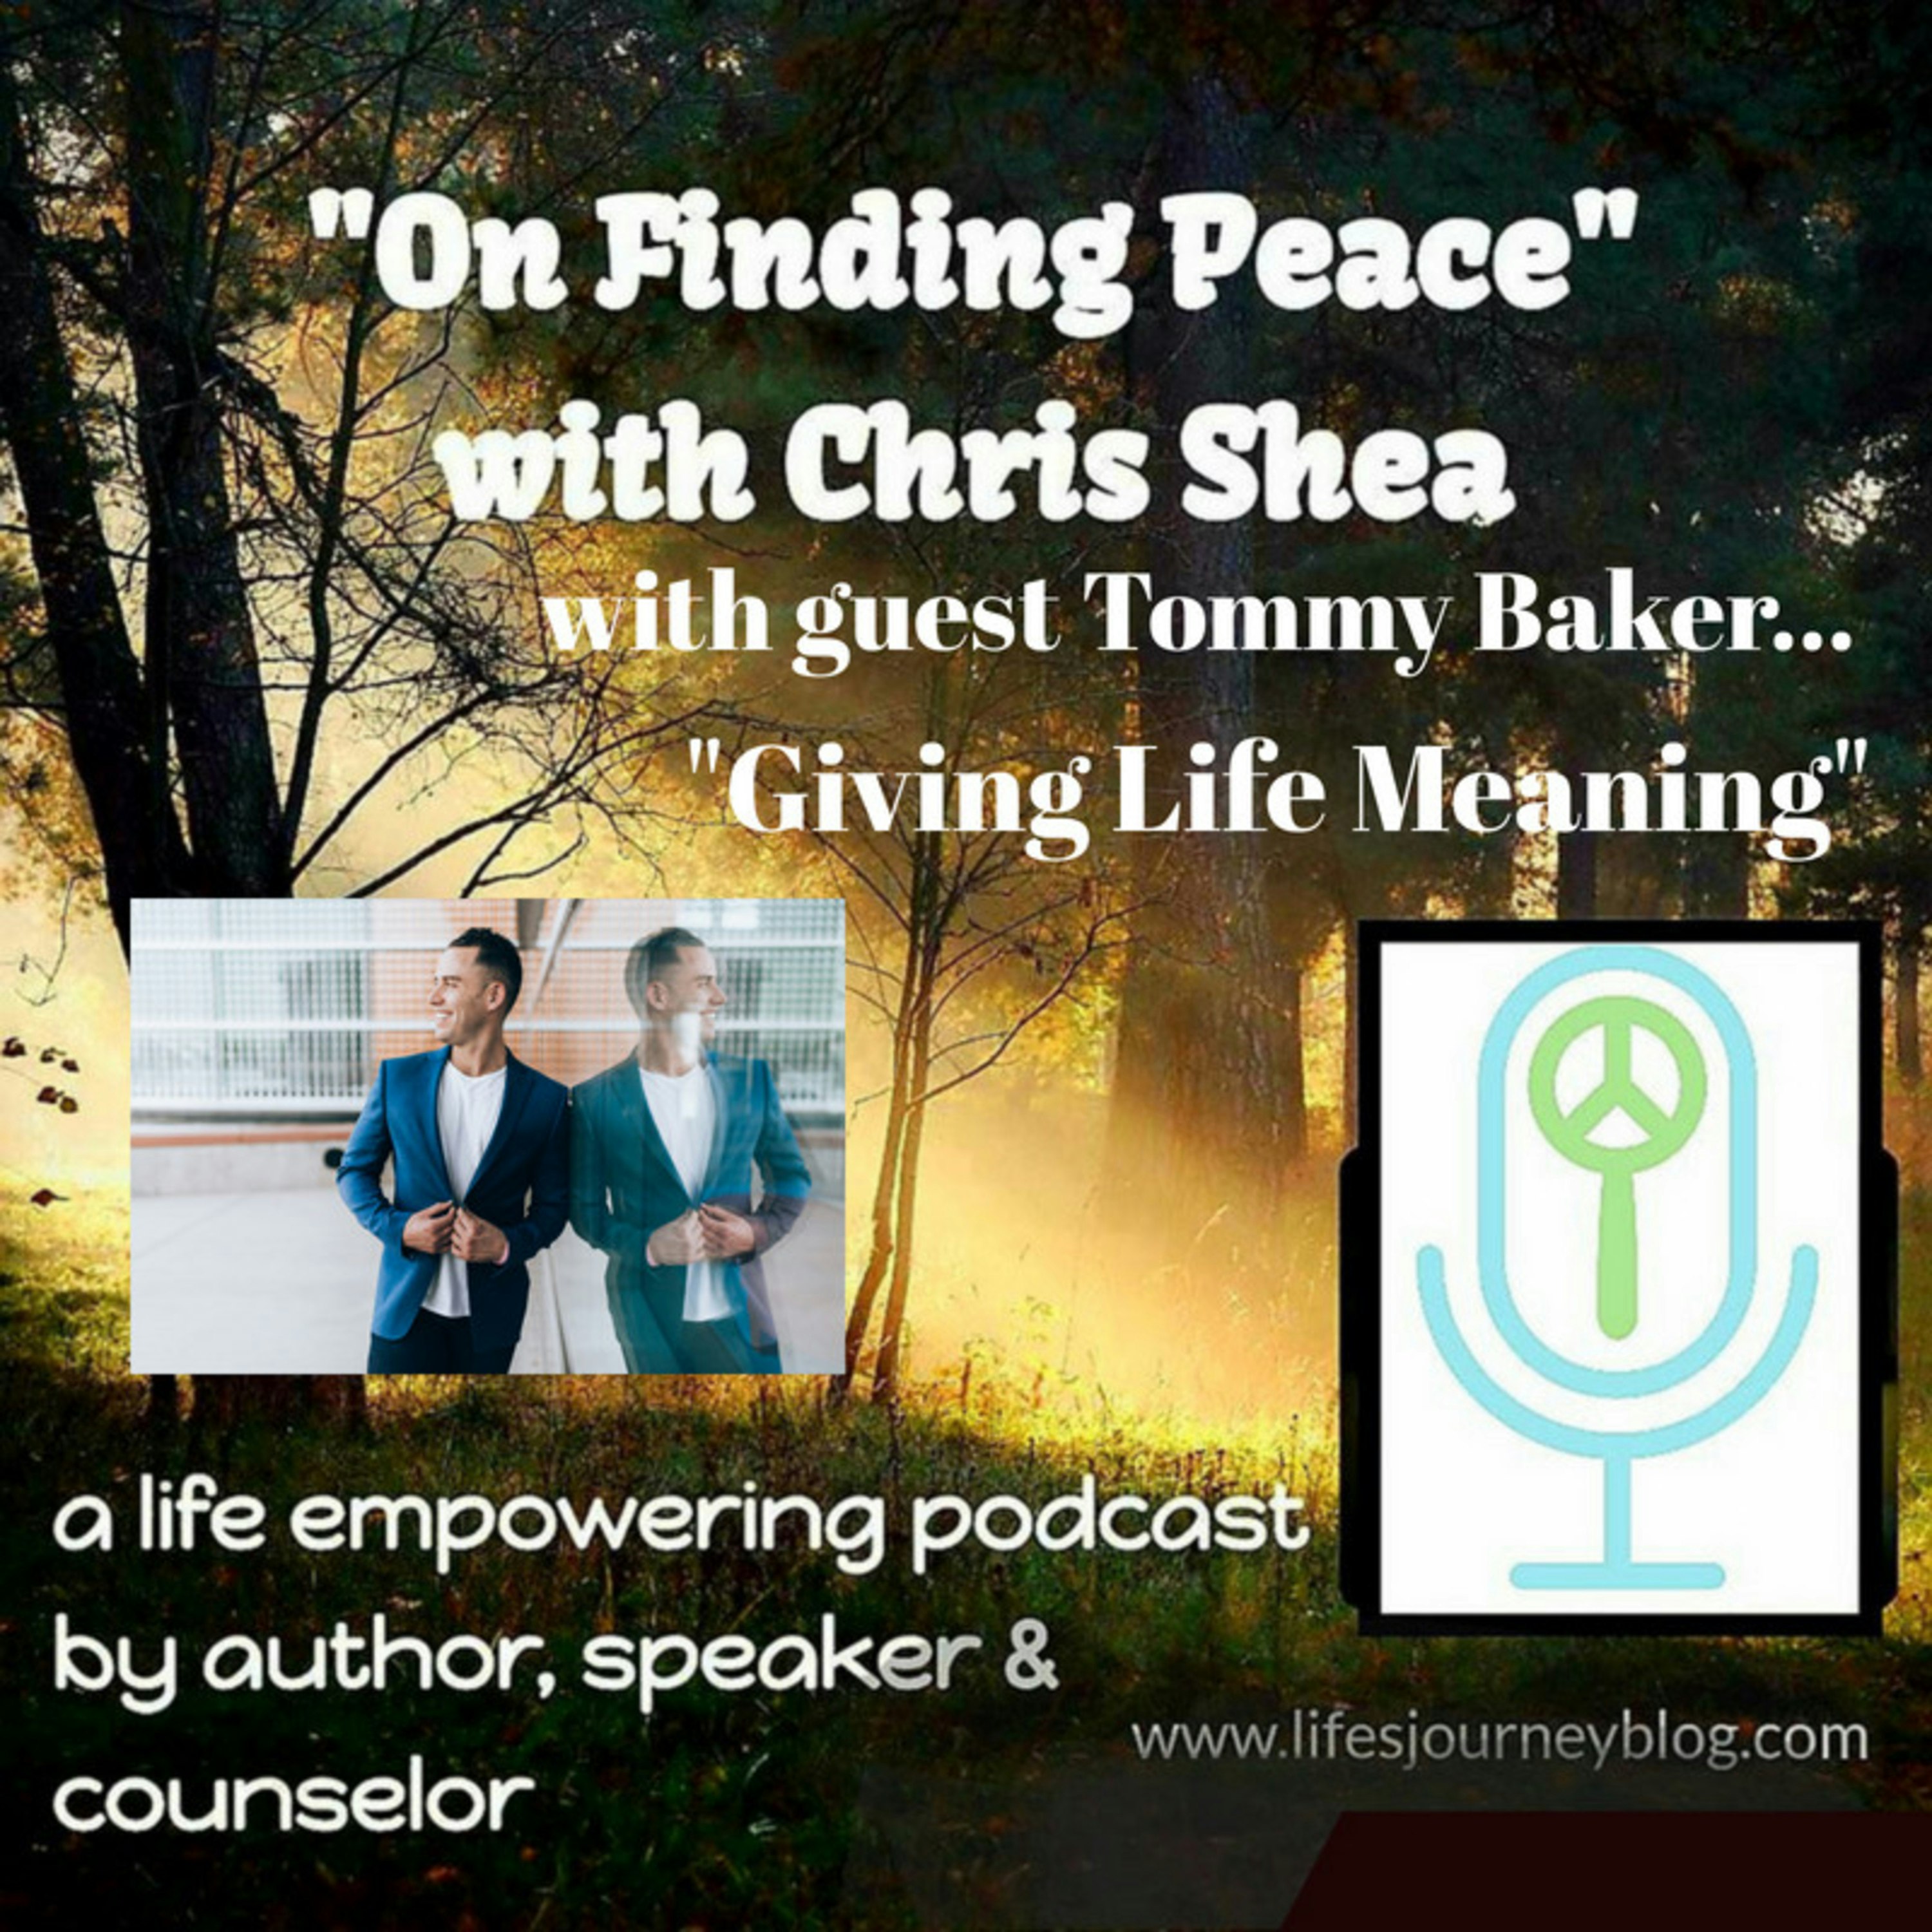 Giving Life Meaning - an interview with Tommy Baker